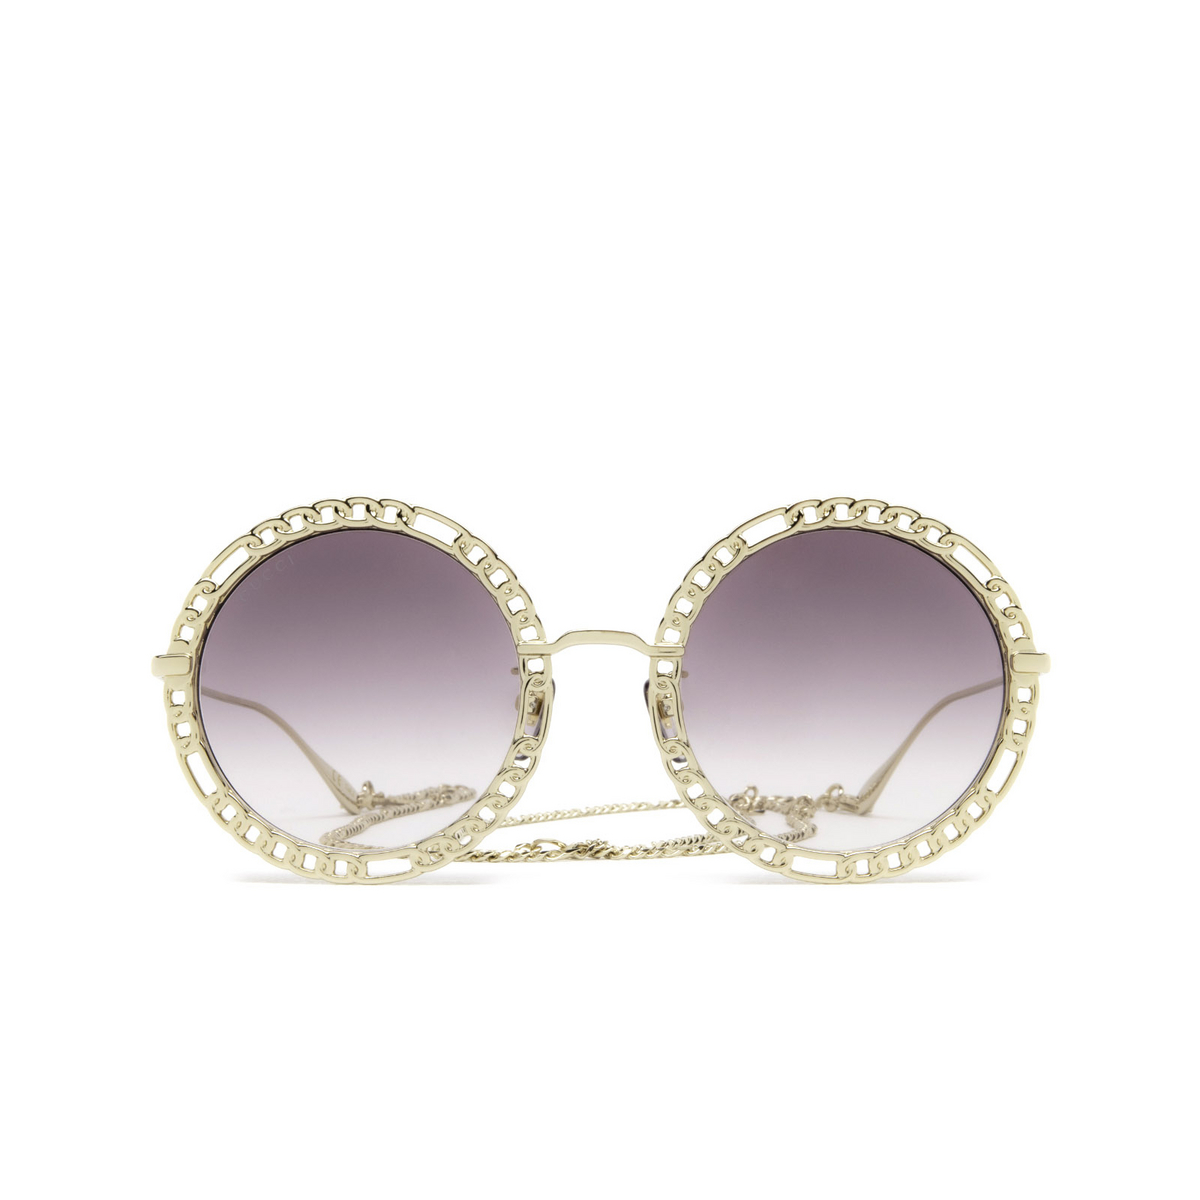 Gucci® Round Sunglasses: GG1113S color Gold 002 - front view.